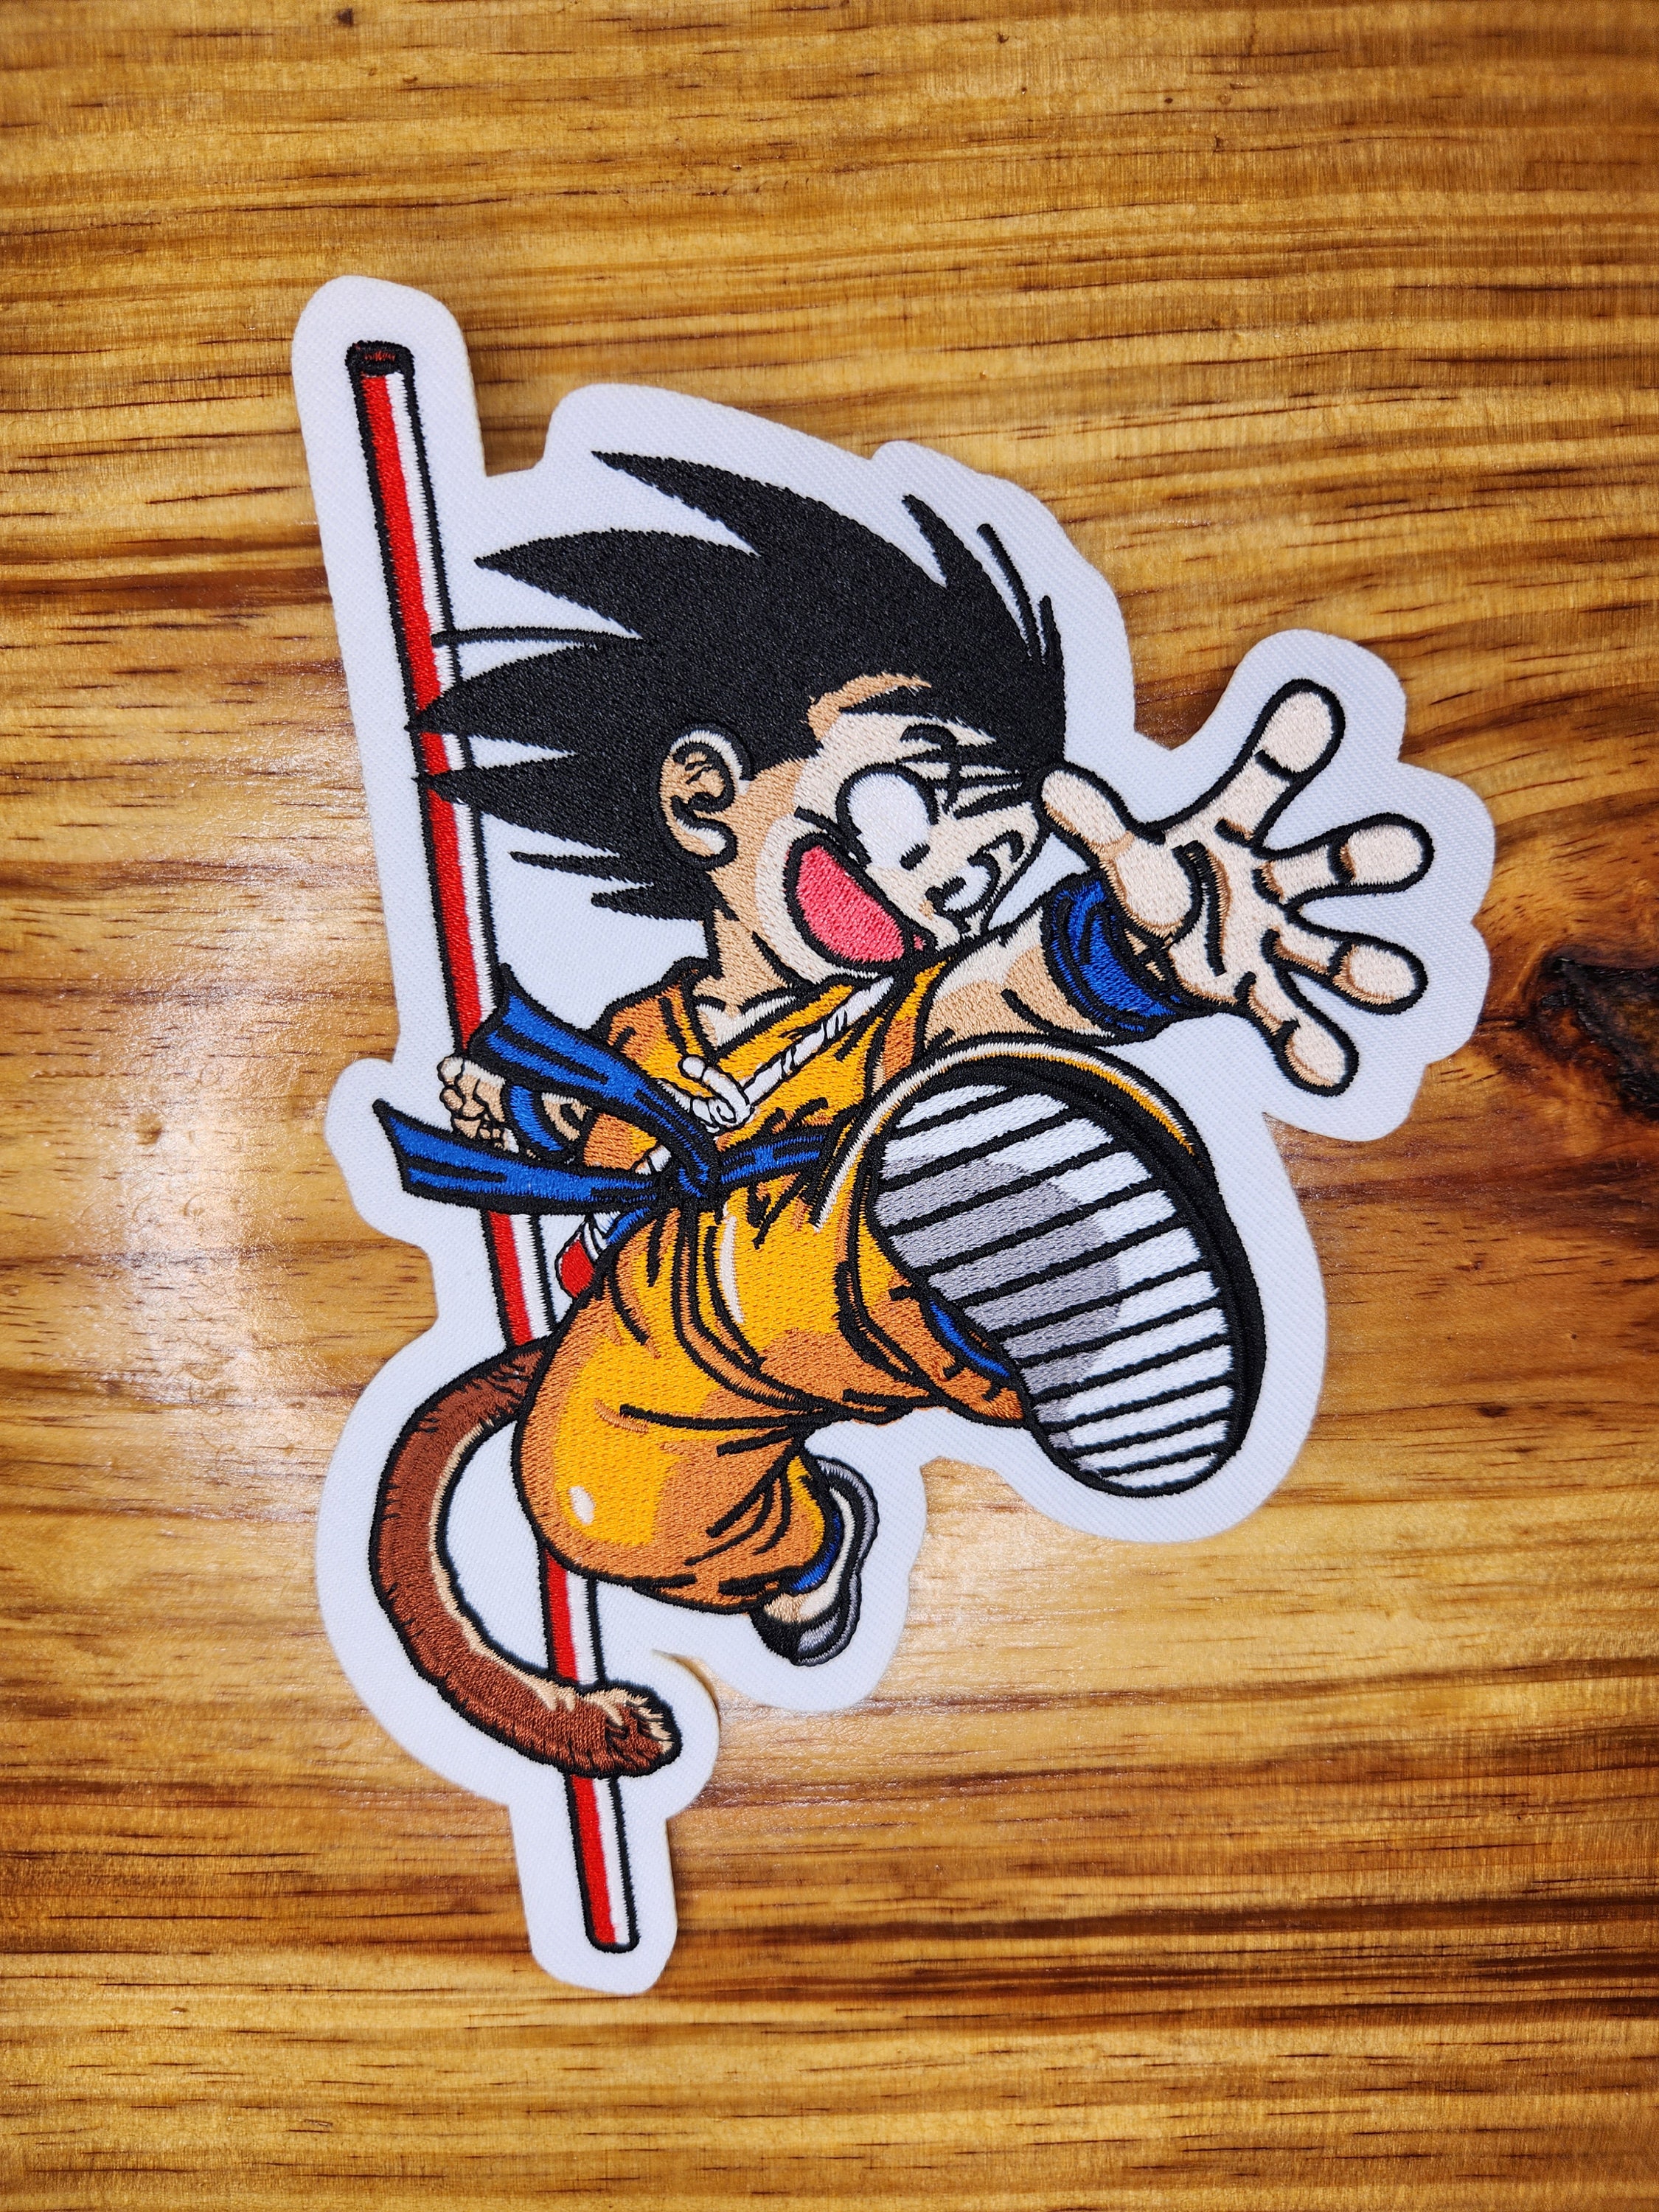 Dragonball Super: Goku Patch Anime Patches